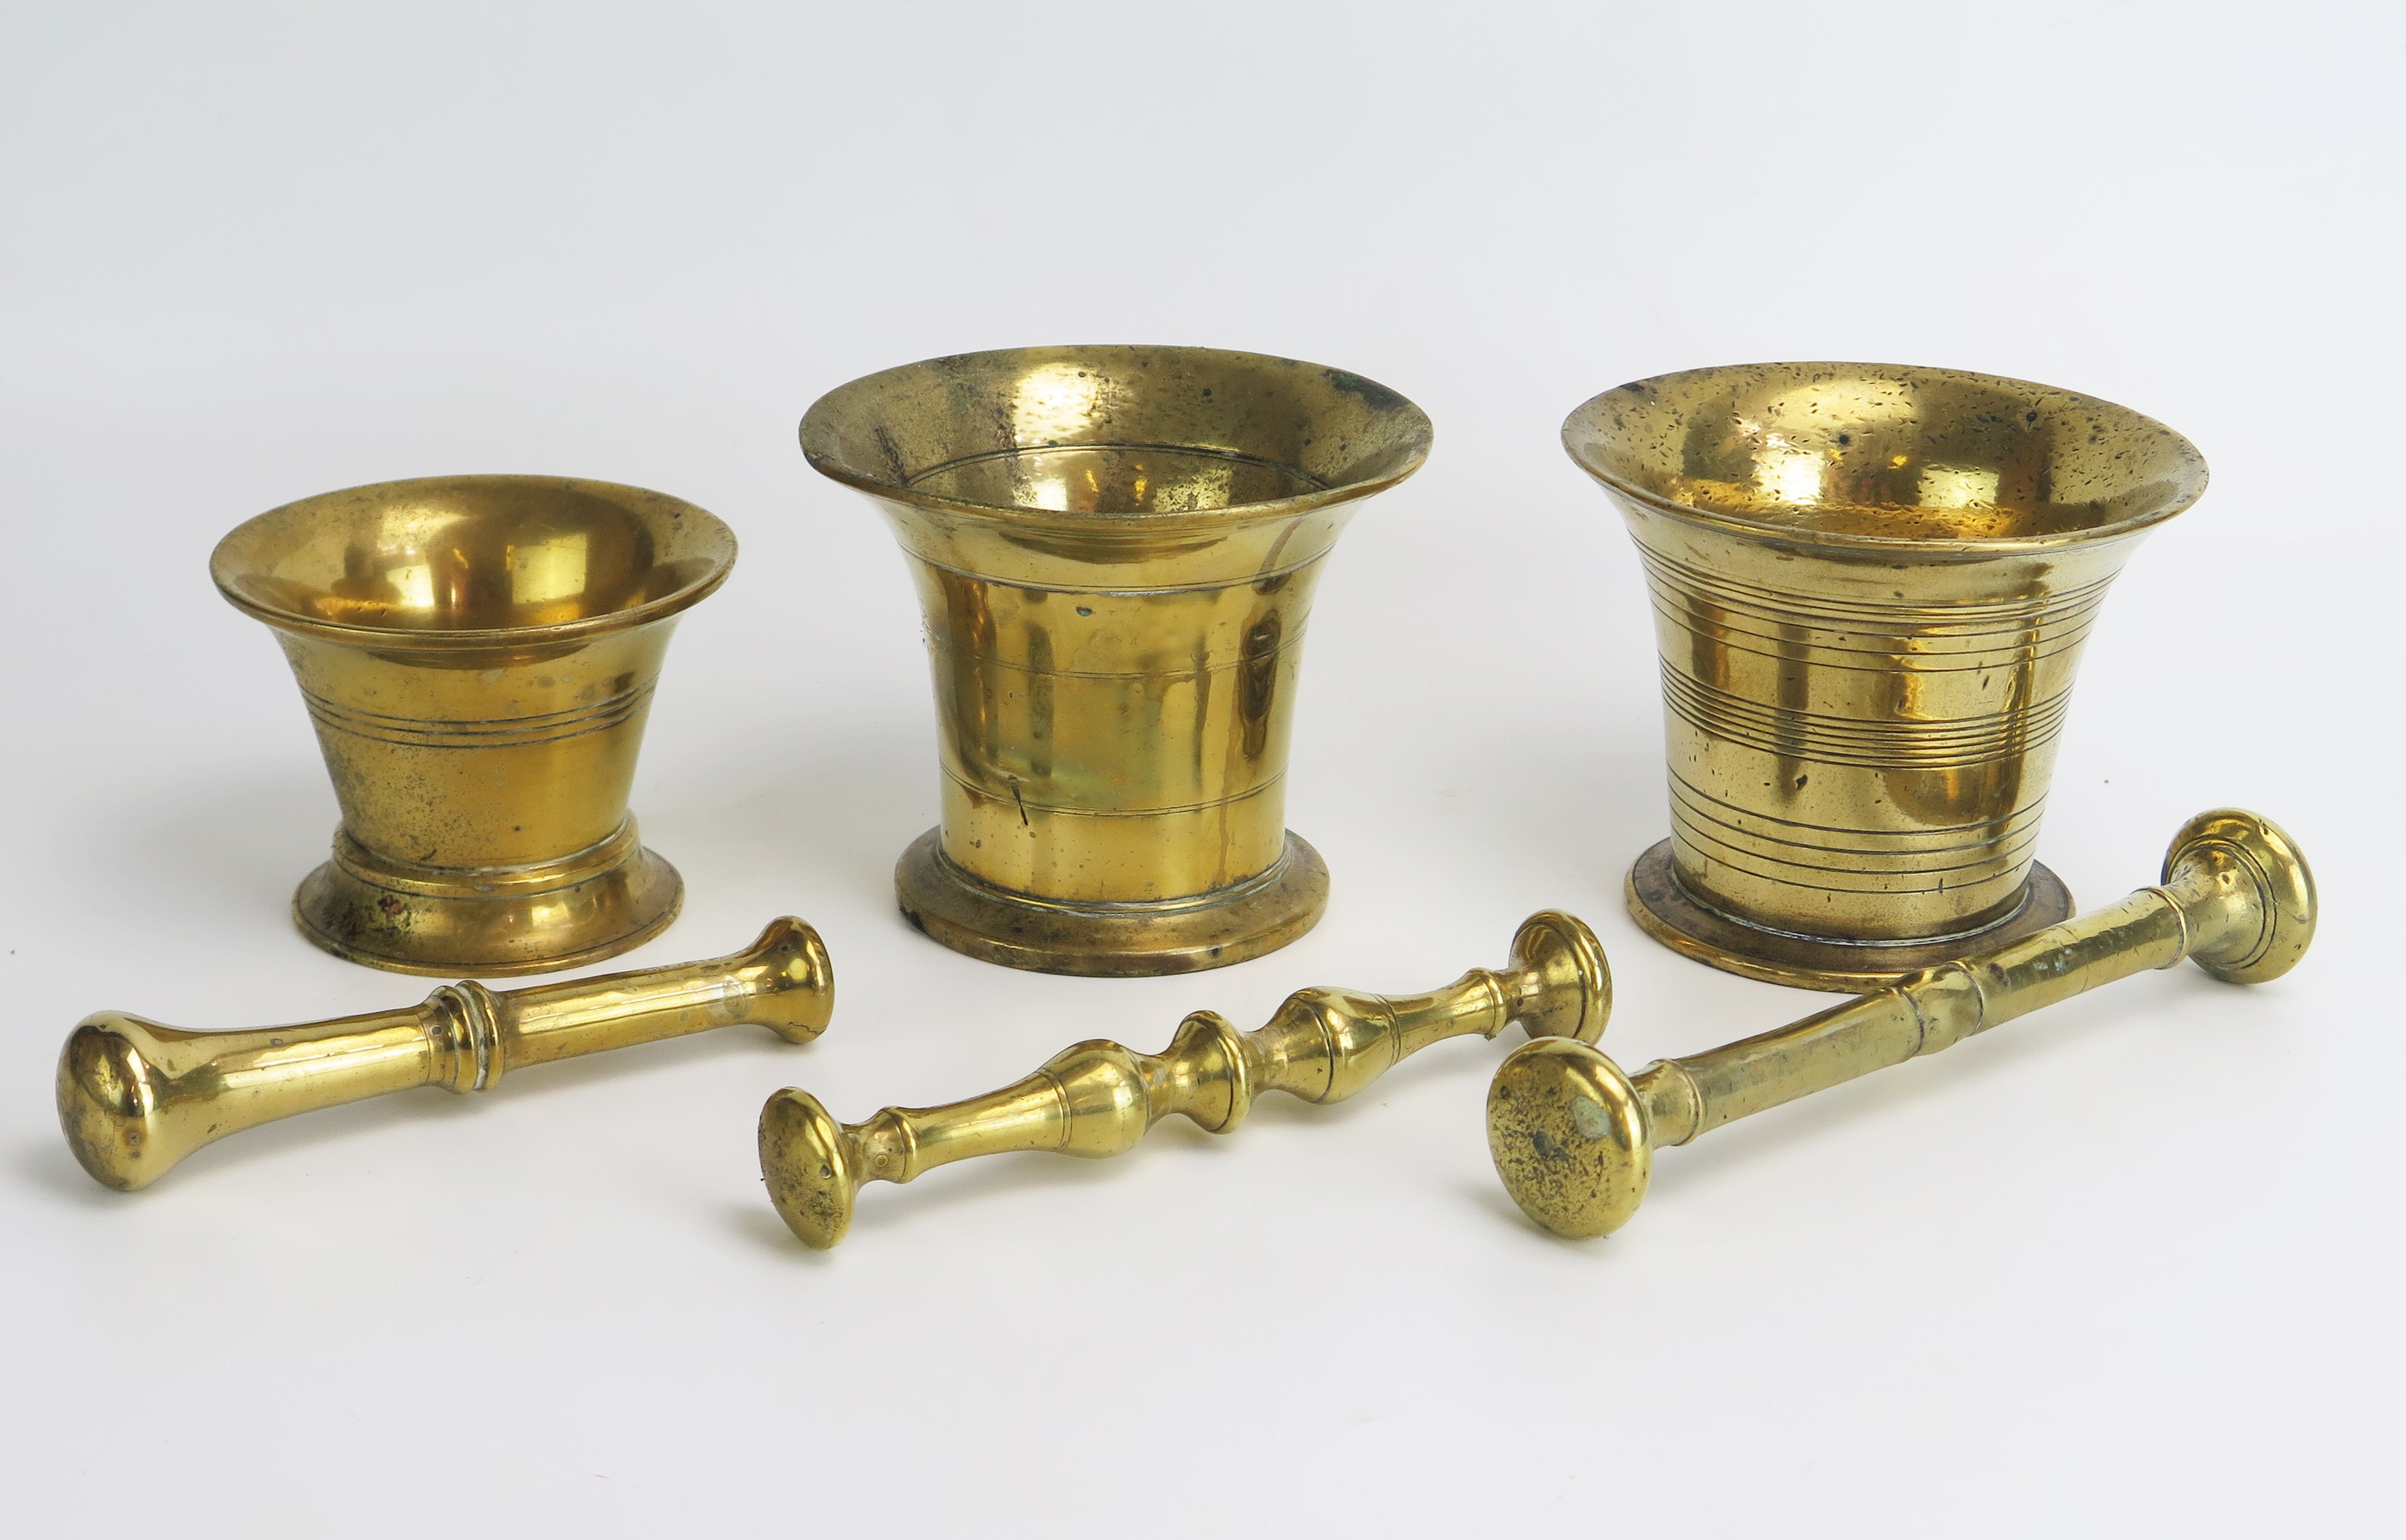 Three 18th century brass pestles and mortars, with ring turned decoration.